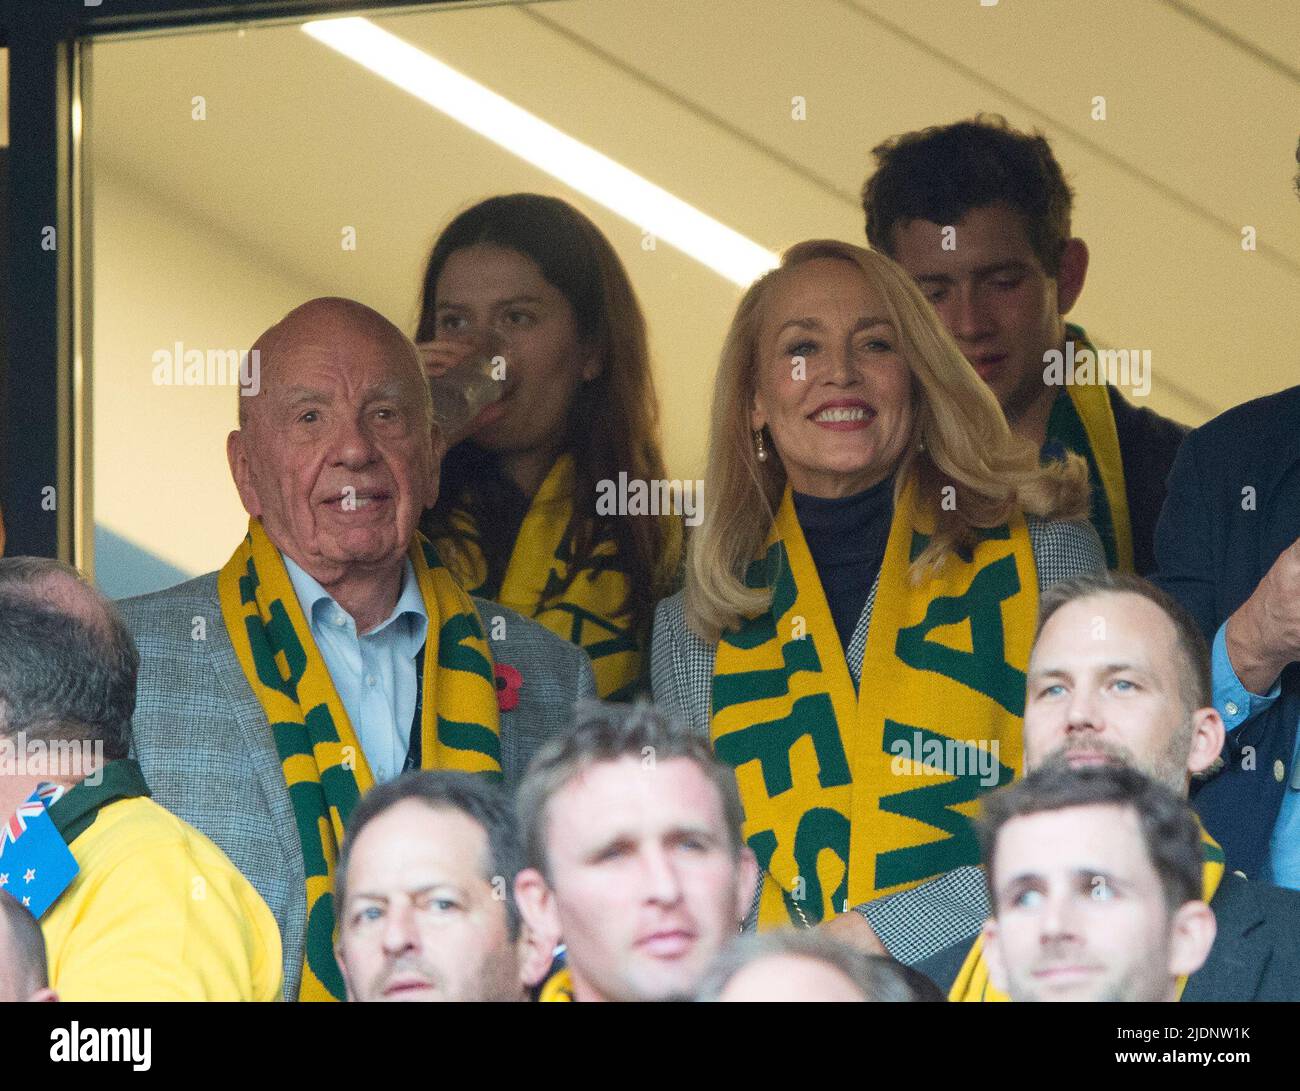 *** FILE PHOTO ***  Jerry Hall and Rupet Murdoch pictured together as a couple for the first time in a VIP hospitality box watching the Rugby World Cup Final 2015 at Twickenham between Australia and New Zealand.  Rugby World Cup 2015 - Final  Twickenham Stadium - 31/10/2015 Copyright Picture : Mark Pain / Alamy Live News Stock Photo